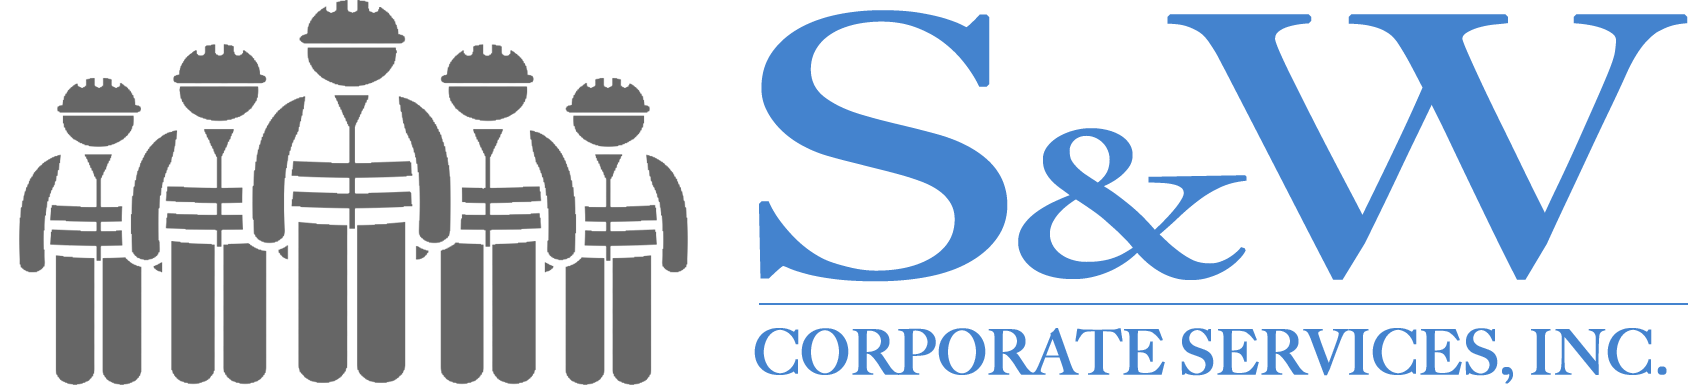 S&amp;W Corporate Services, Inc